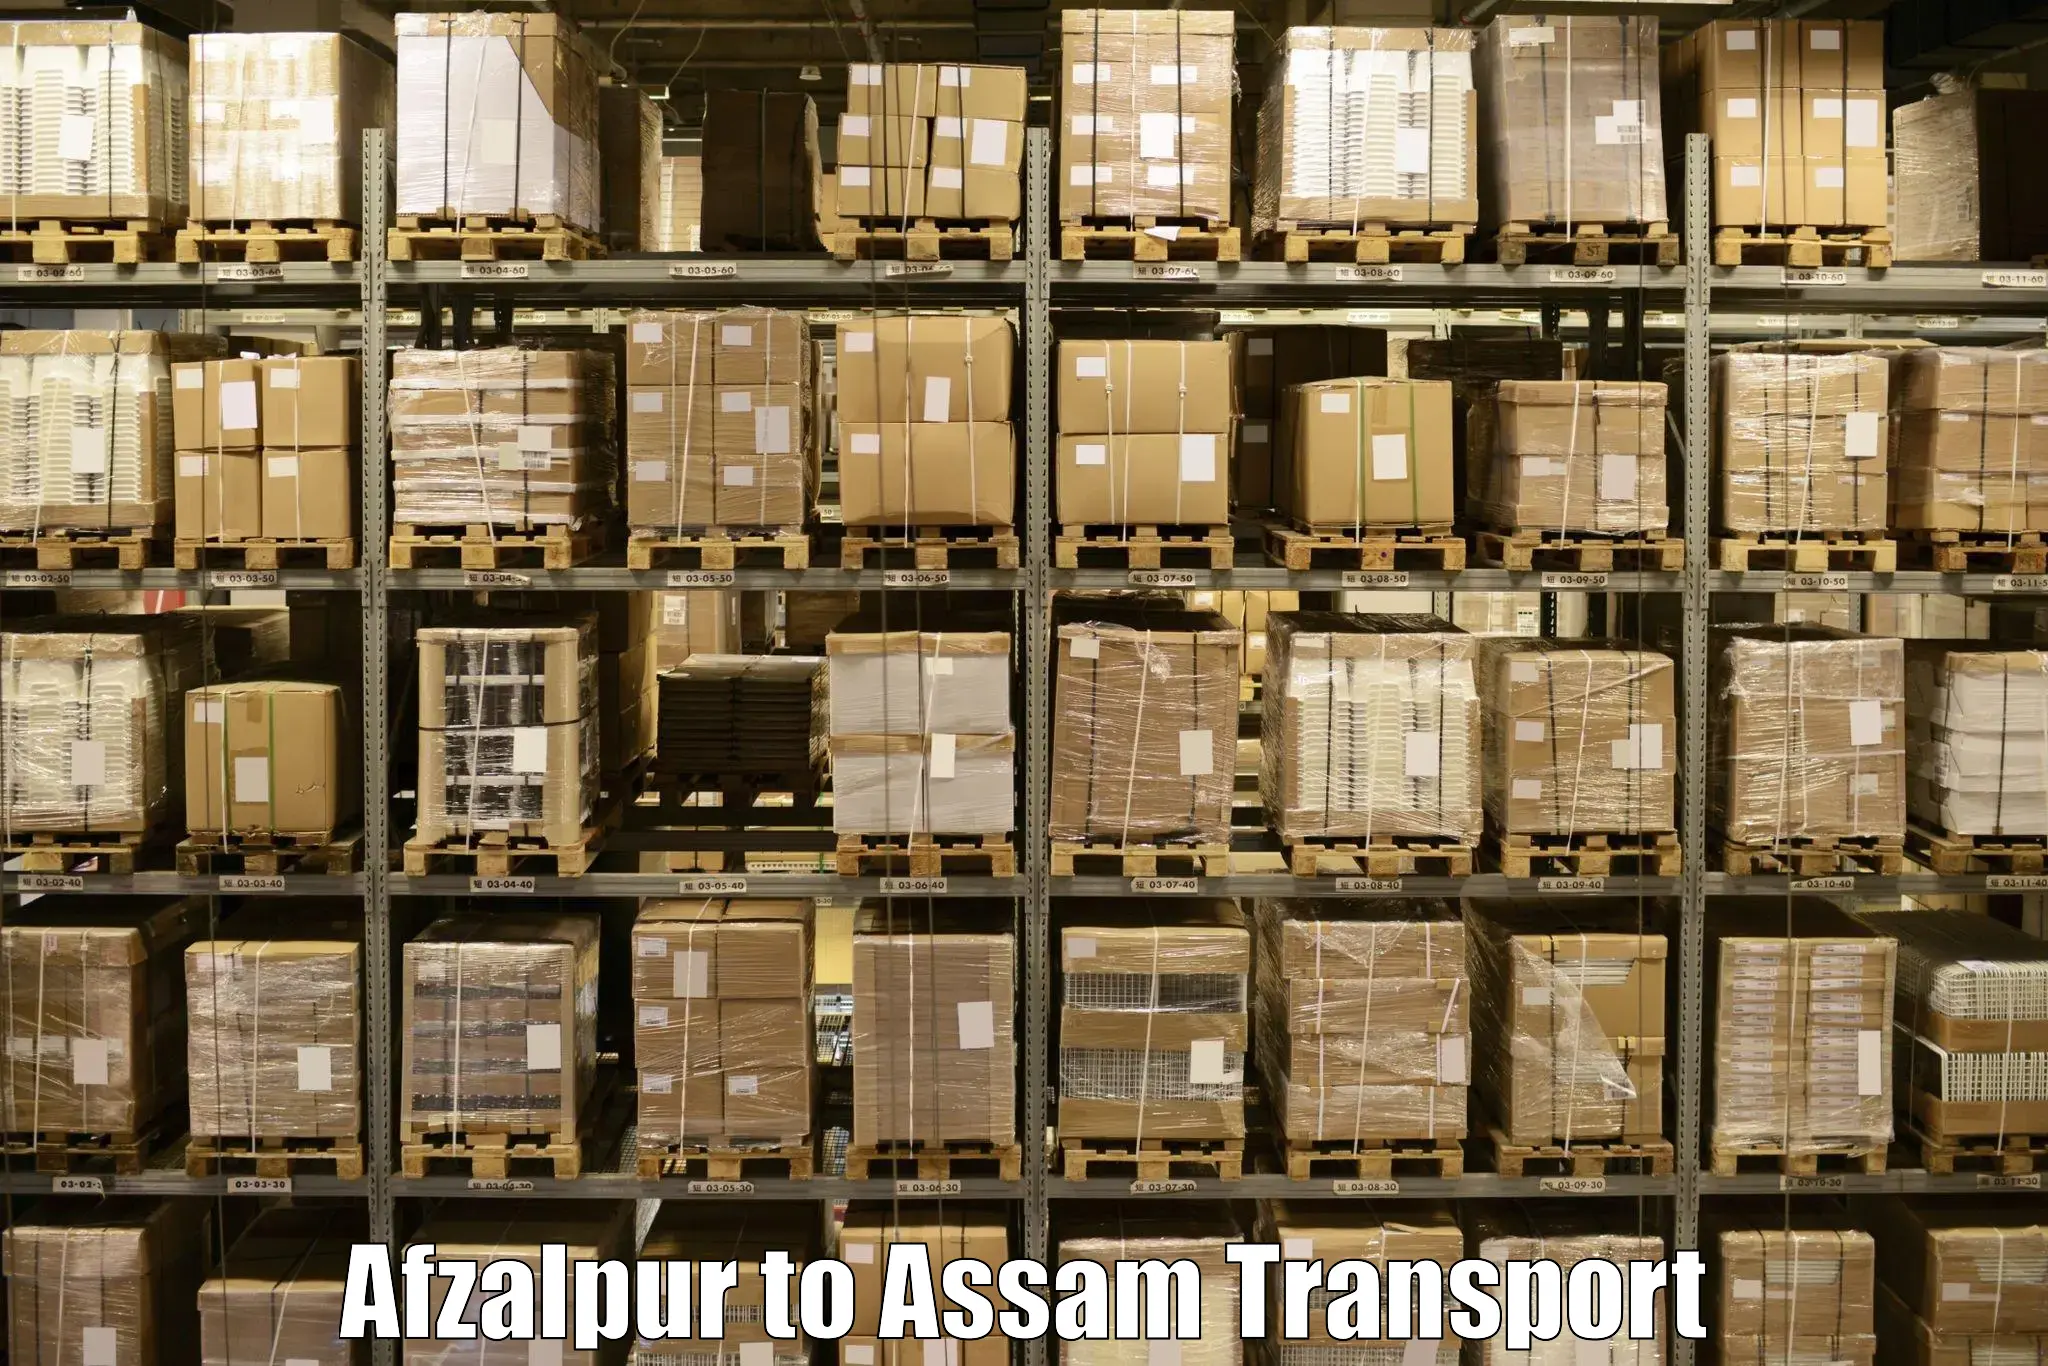 Transport bike from one state to another Afzalpur to Assam